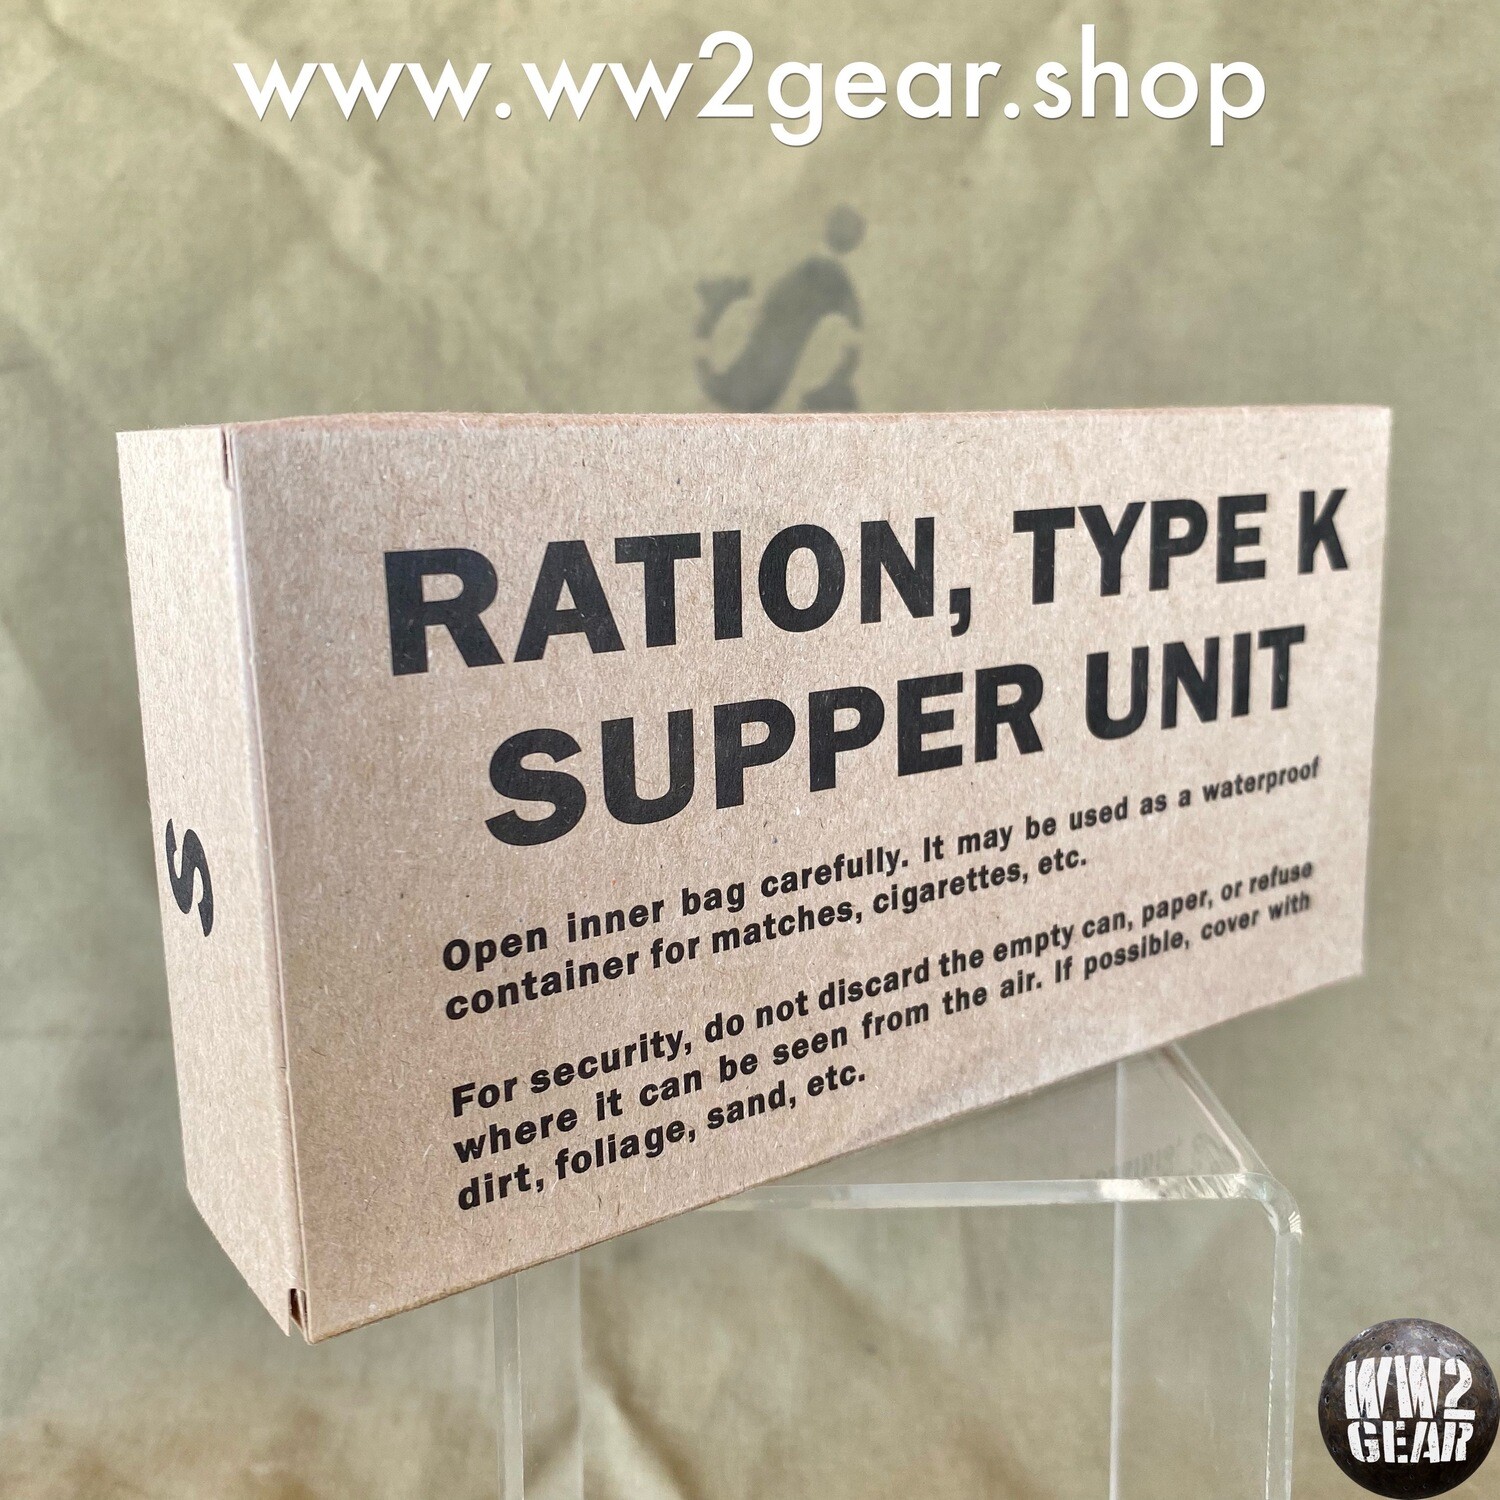 US WW2 K Ration - Type III, Supper Unit (Reproduction)